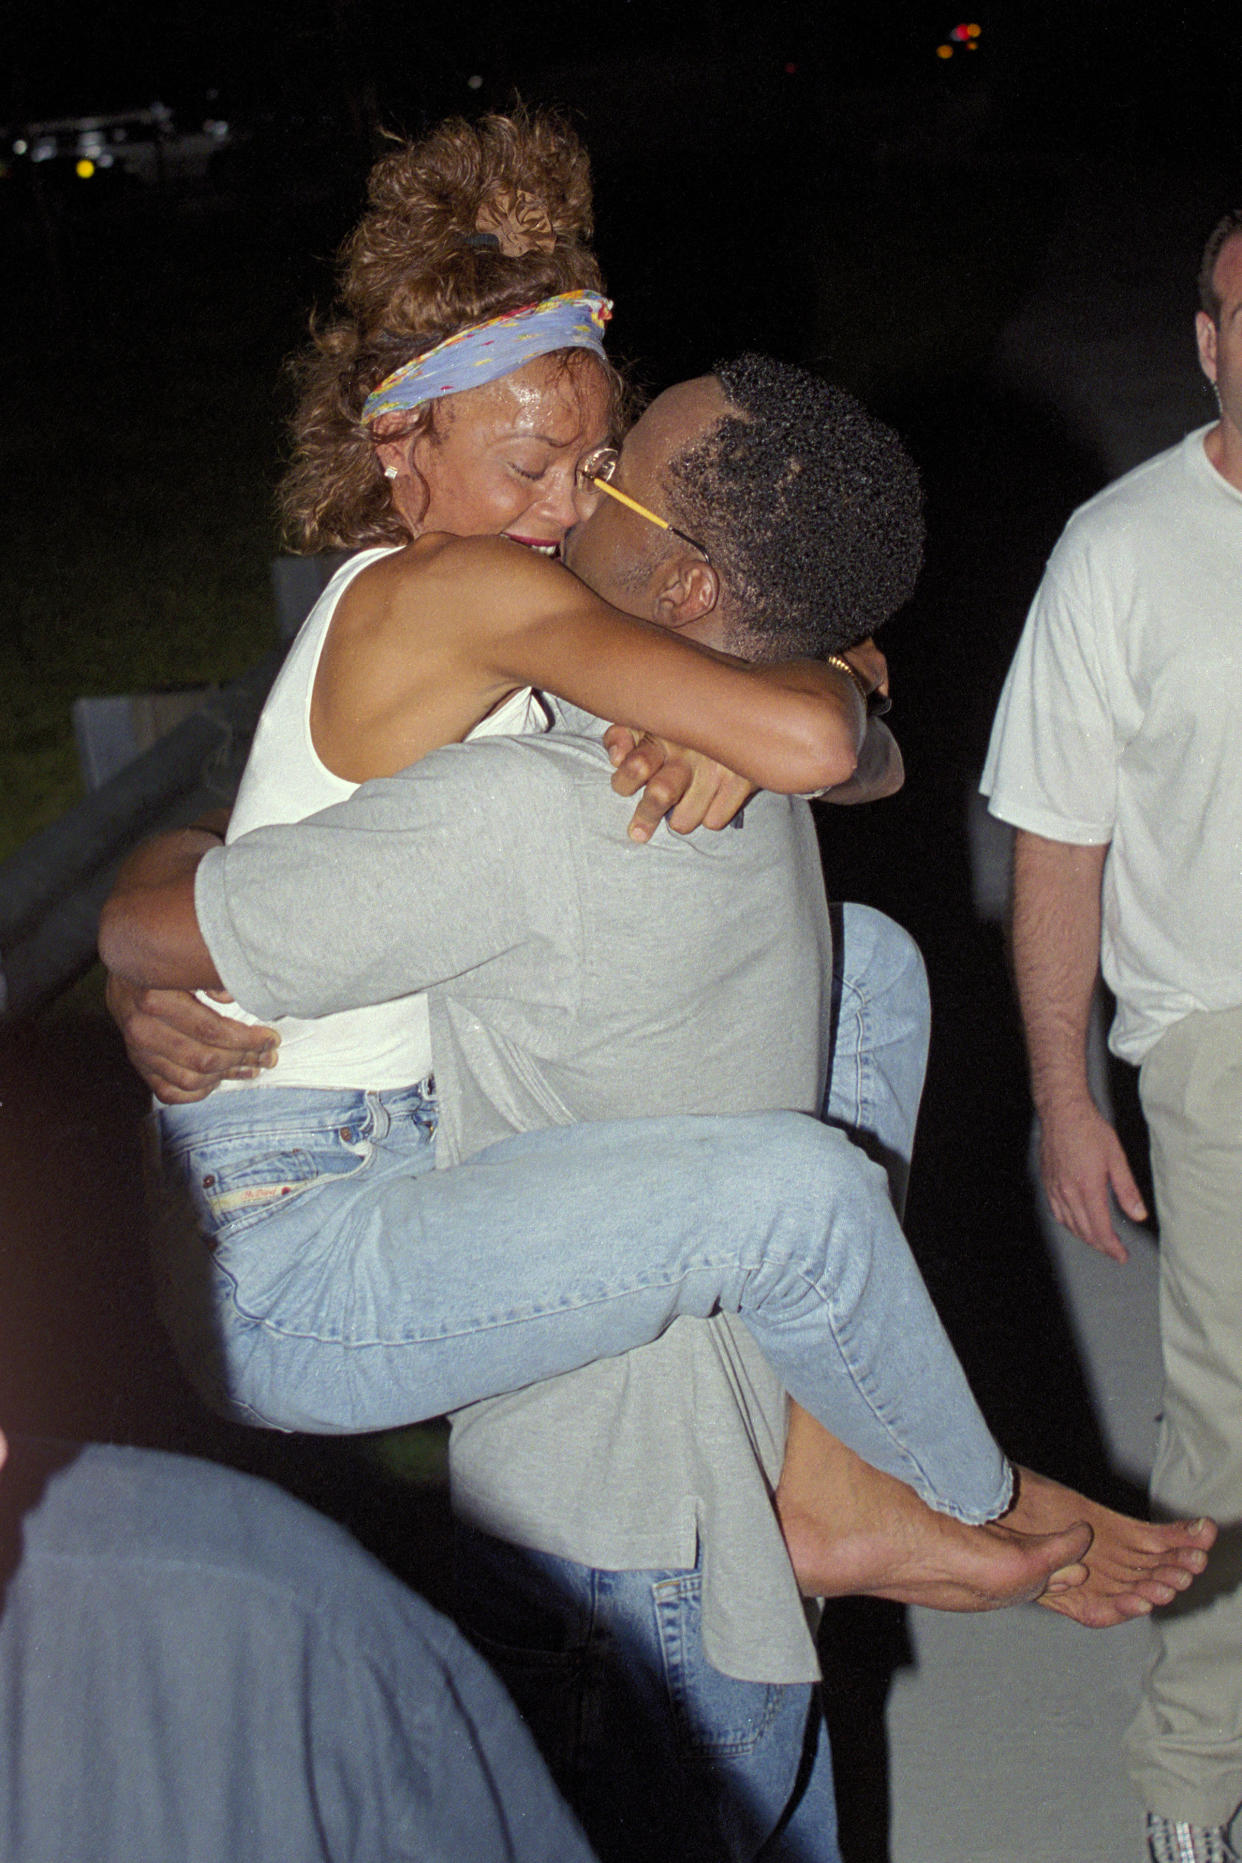 FORT LAUDERDALE, FL - JULY 7: Whitney Houston and Bobby Brown are sighted after Bobby's release from jail on July 7, 2000 at the Fort Lauderdale Jail in Fort Lauderdale, Florida. (Photo by Larry Marano/Getty Images)